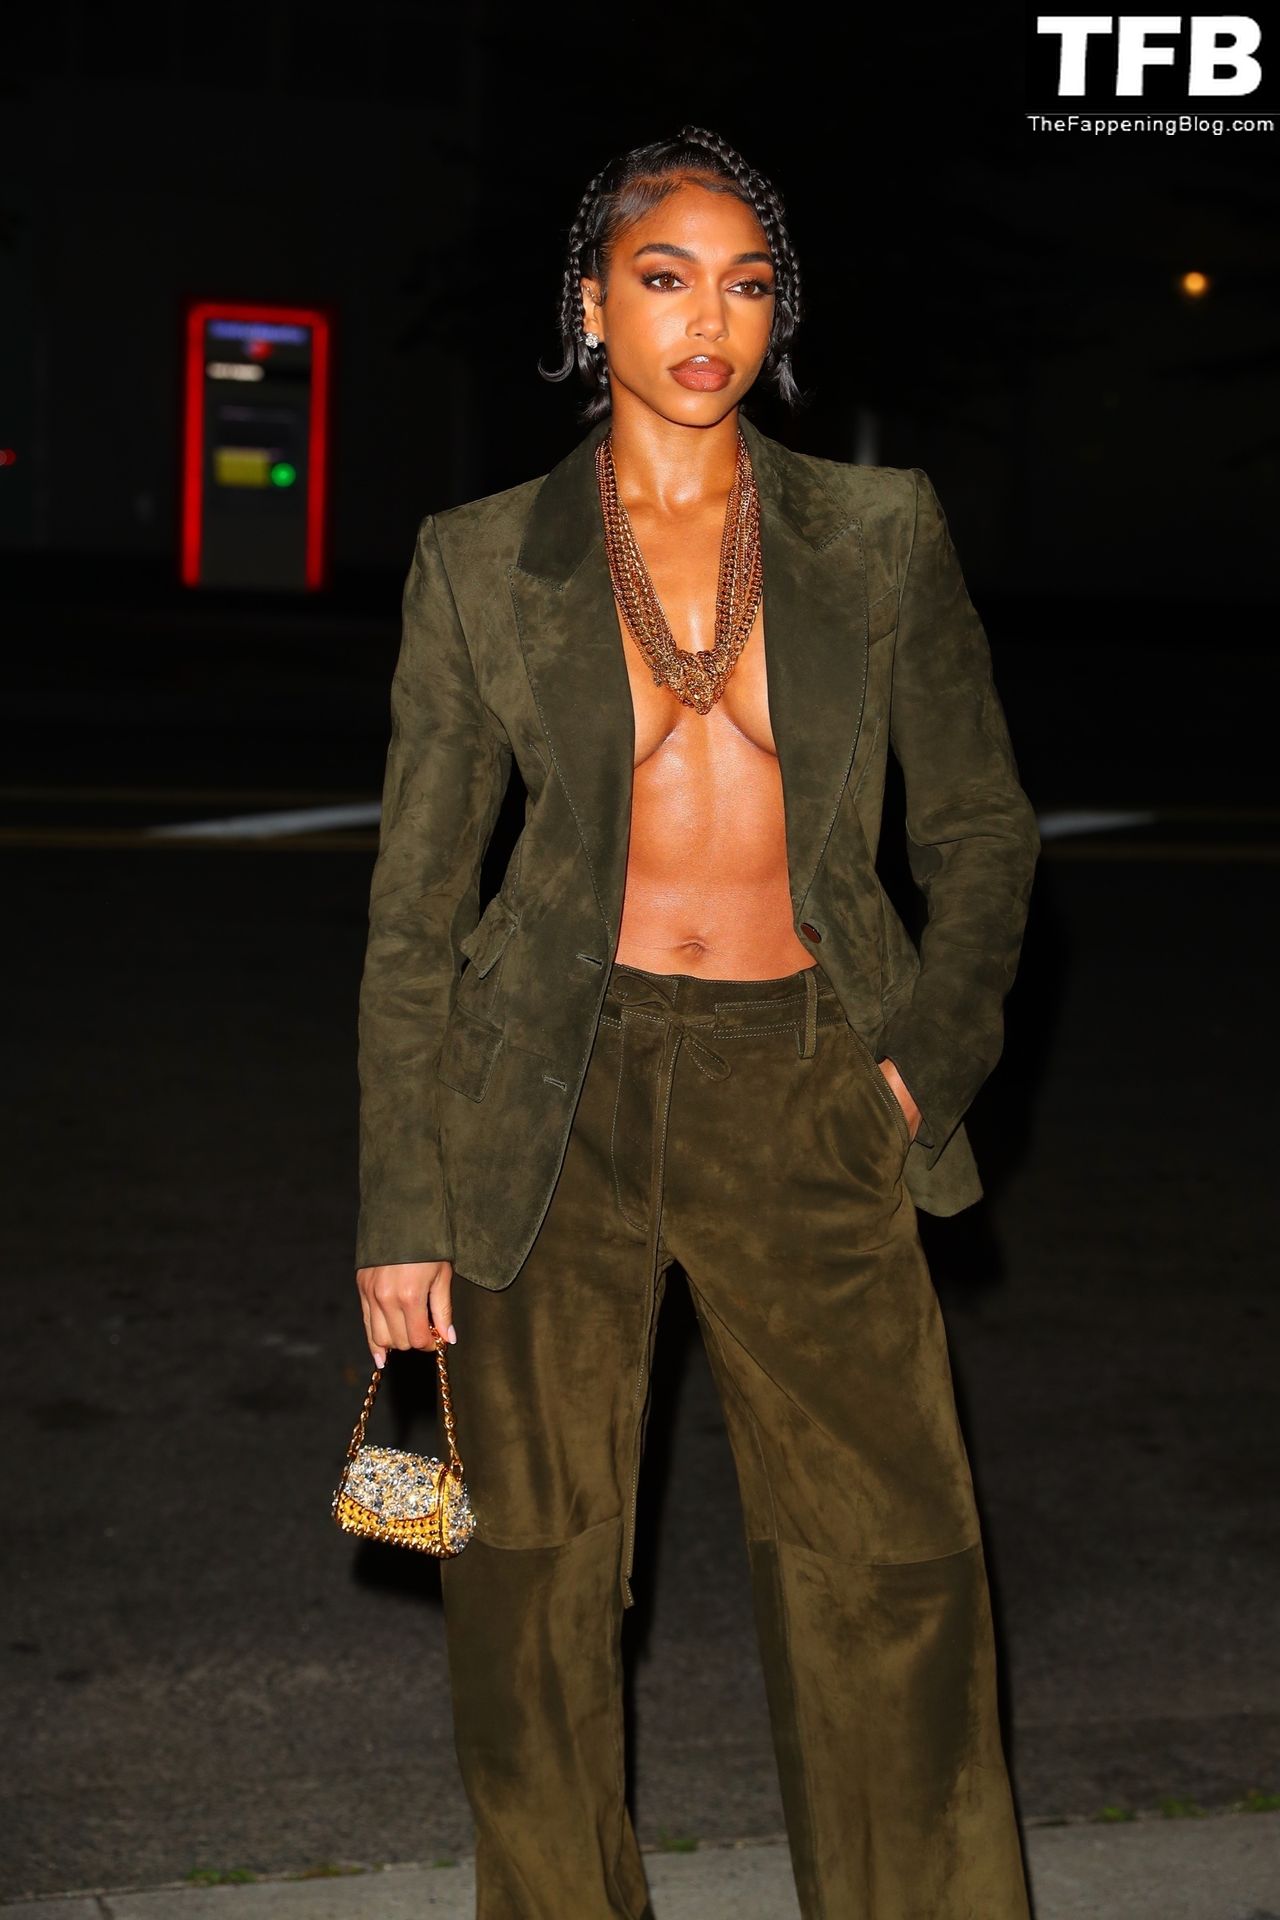 Lori Harvey Sexy The Fappening Blog 25 - Lori Harvey Shows Off Her Tits at the Tom Ford Fashion Show (38 Photos)